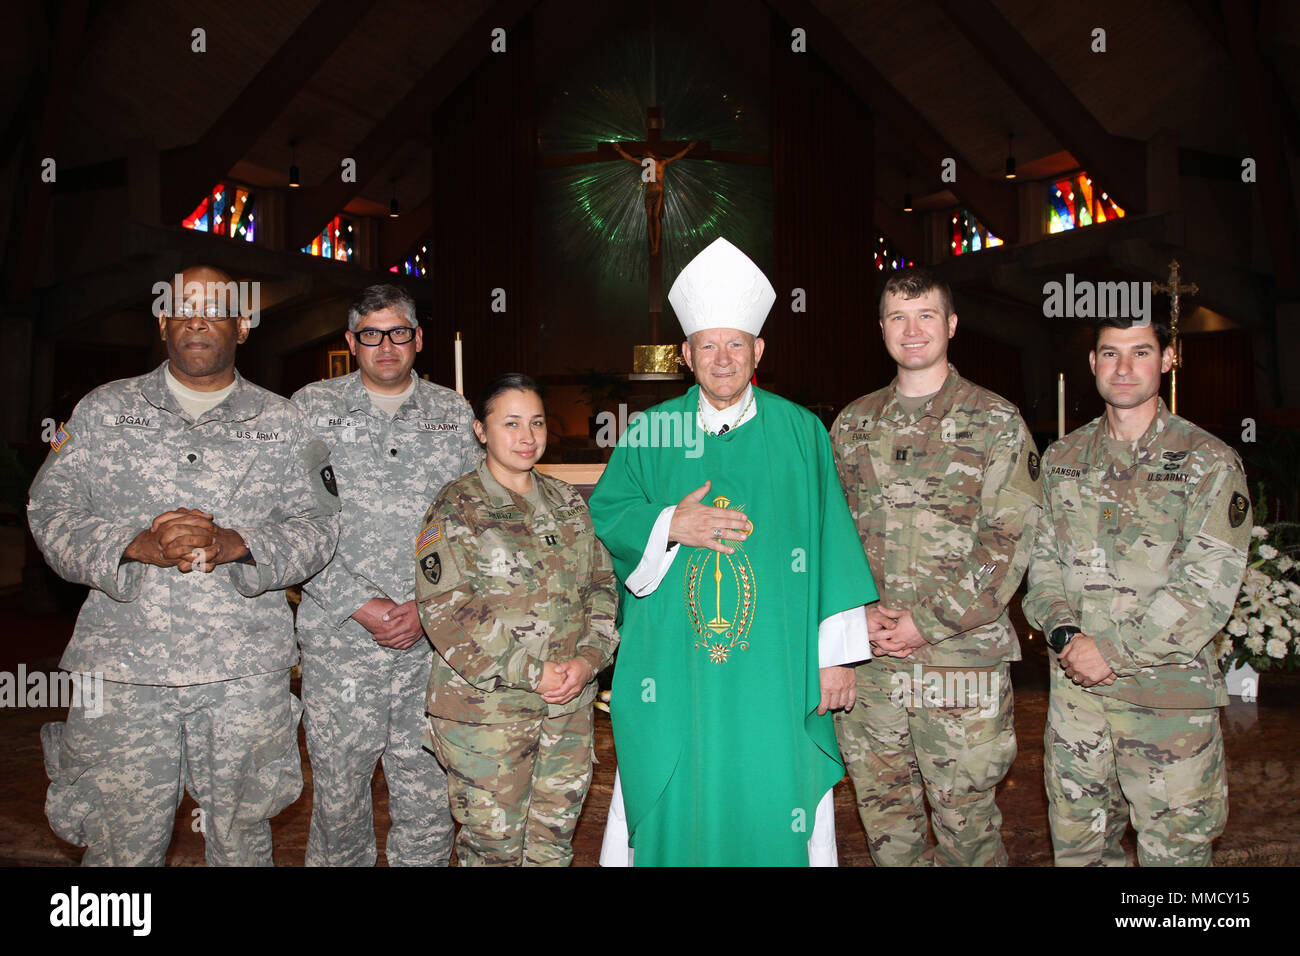 A special Catholic mass was held in honor of the California Army National Guard Oct. 15 at Saint John the Baptist Church in Napa, California, with Bishop Robert F. Vasa, Diocese of Santa Rosa leader, presiding. Members of the 185th MP BN, Spc. Donald Logan, Spc. Jesus Flores, Capt. Antonia Ambriz, Chaplain (Capt.) David Evans and Maj. Andrew Hanson, executive officer, attended the ceremony. “Without a doubt, your presence is a great source of consolation to all the people,” Bishop Vasa said. “It lets the people know they are not alone in their struggles. The nation is here for us.” Also attend Stock Photo